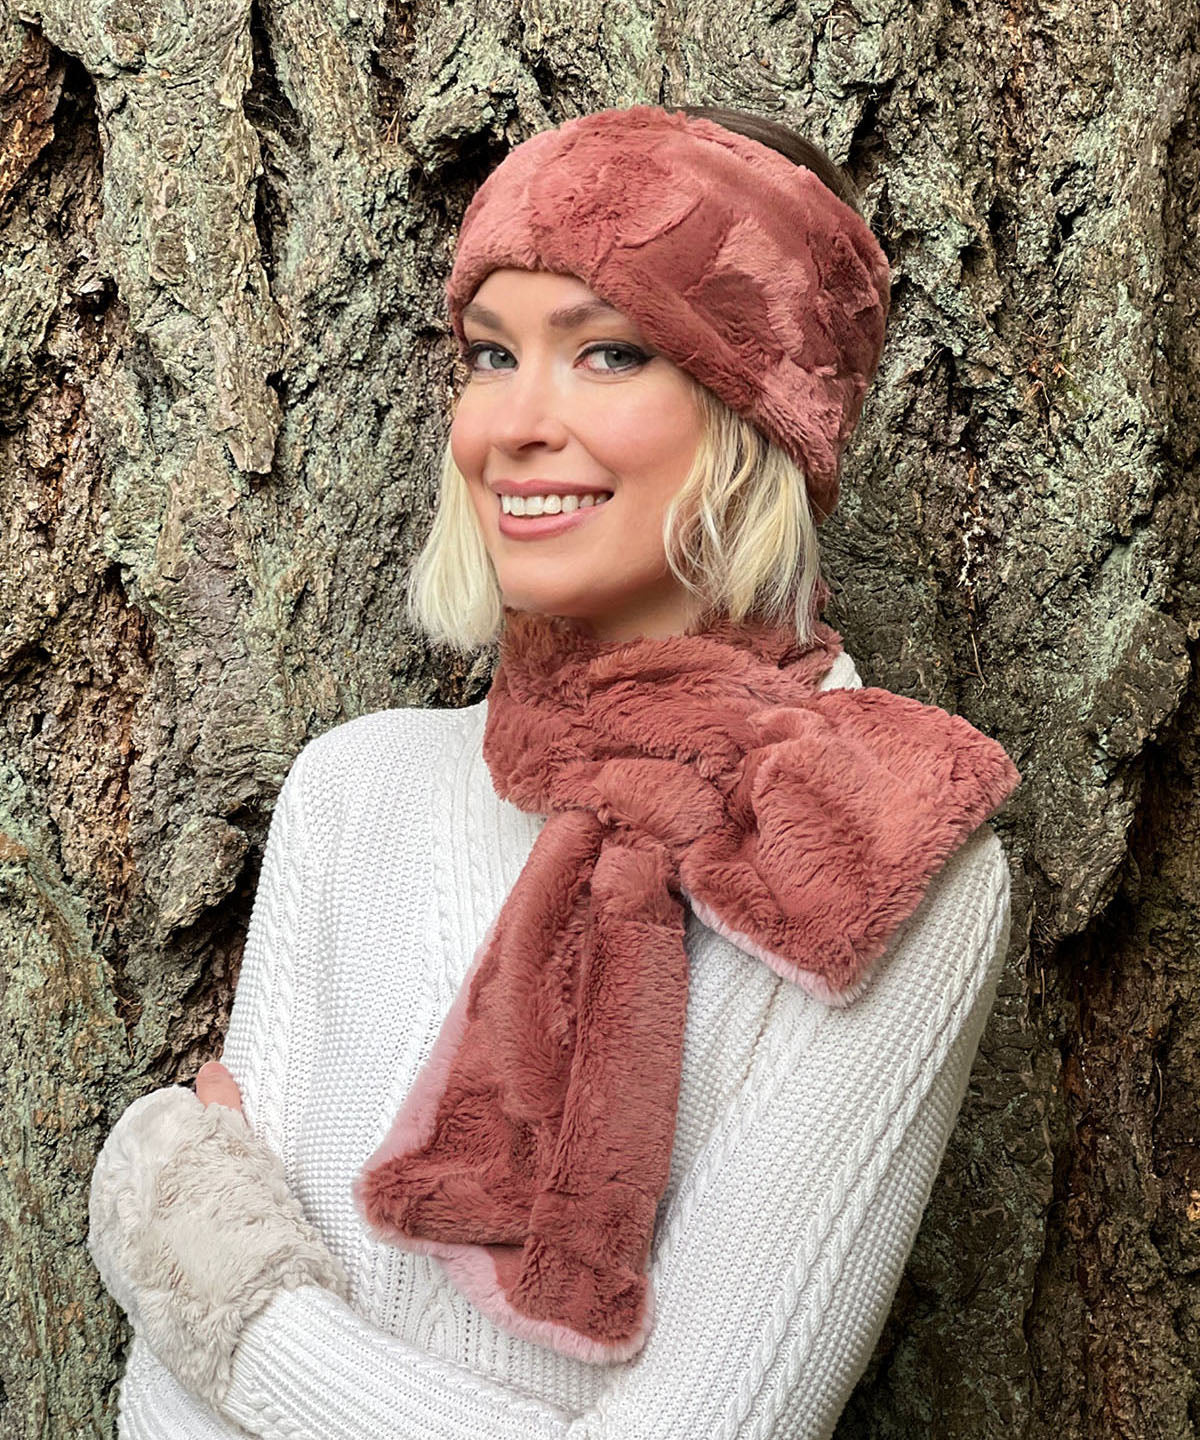 Pull-Thru Scarf on Woman | Frosted Cedar and Copper River Faux Fur | Handmade USA by Pandemonium Seattle